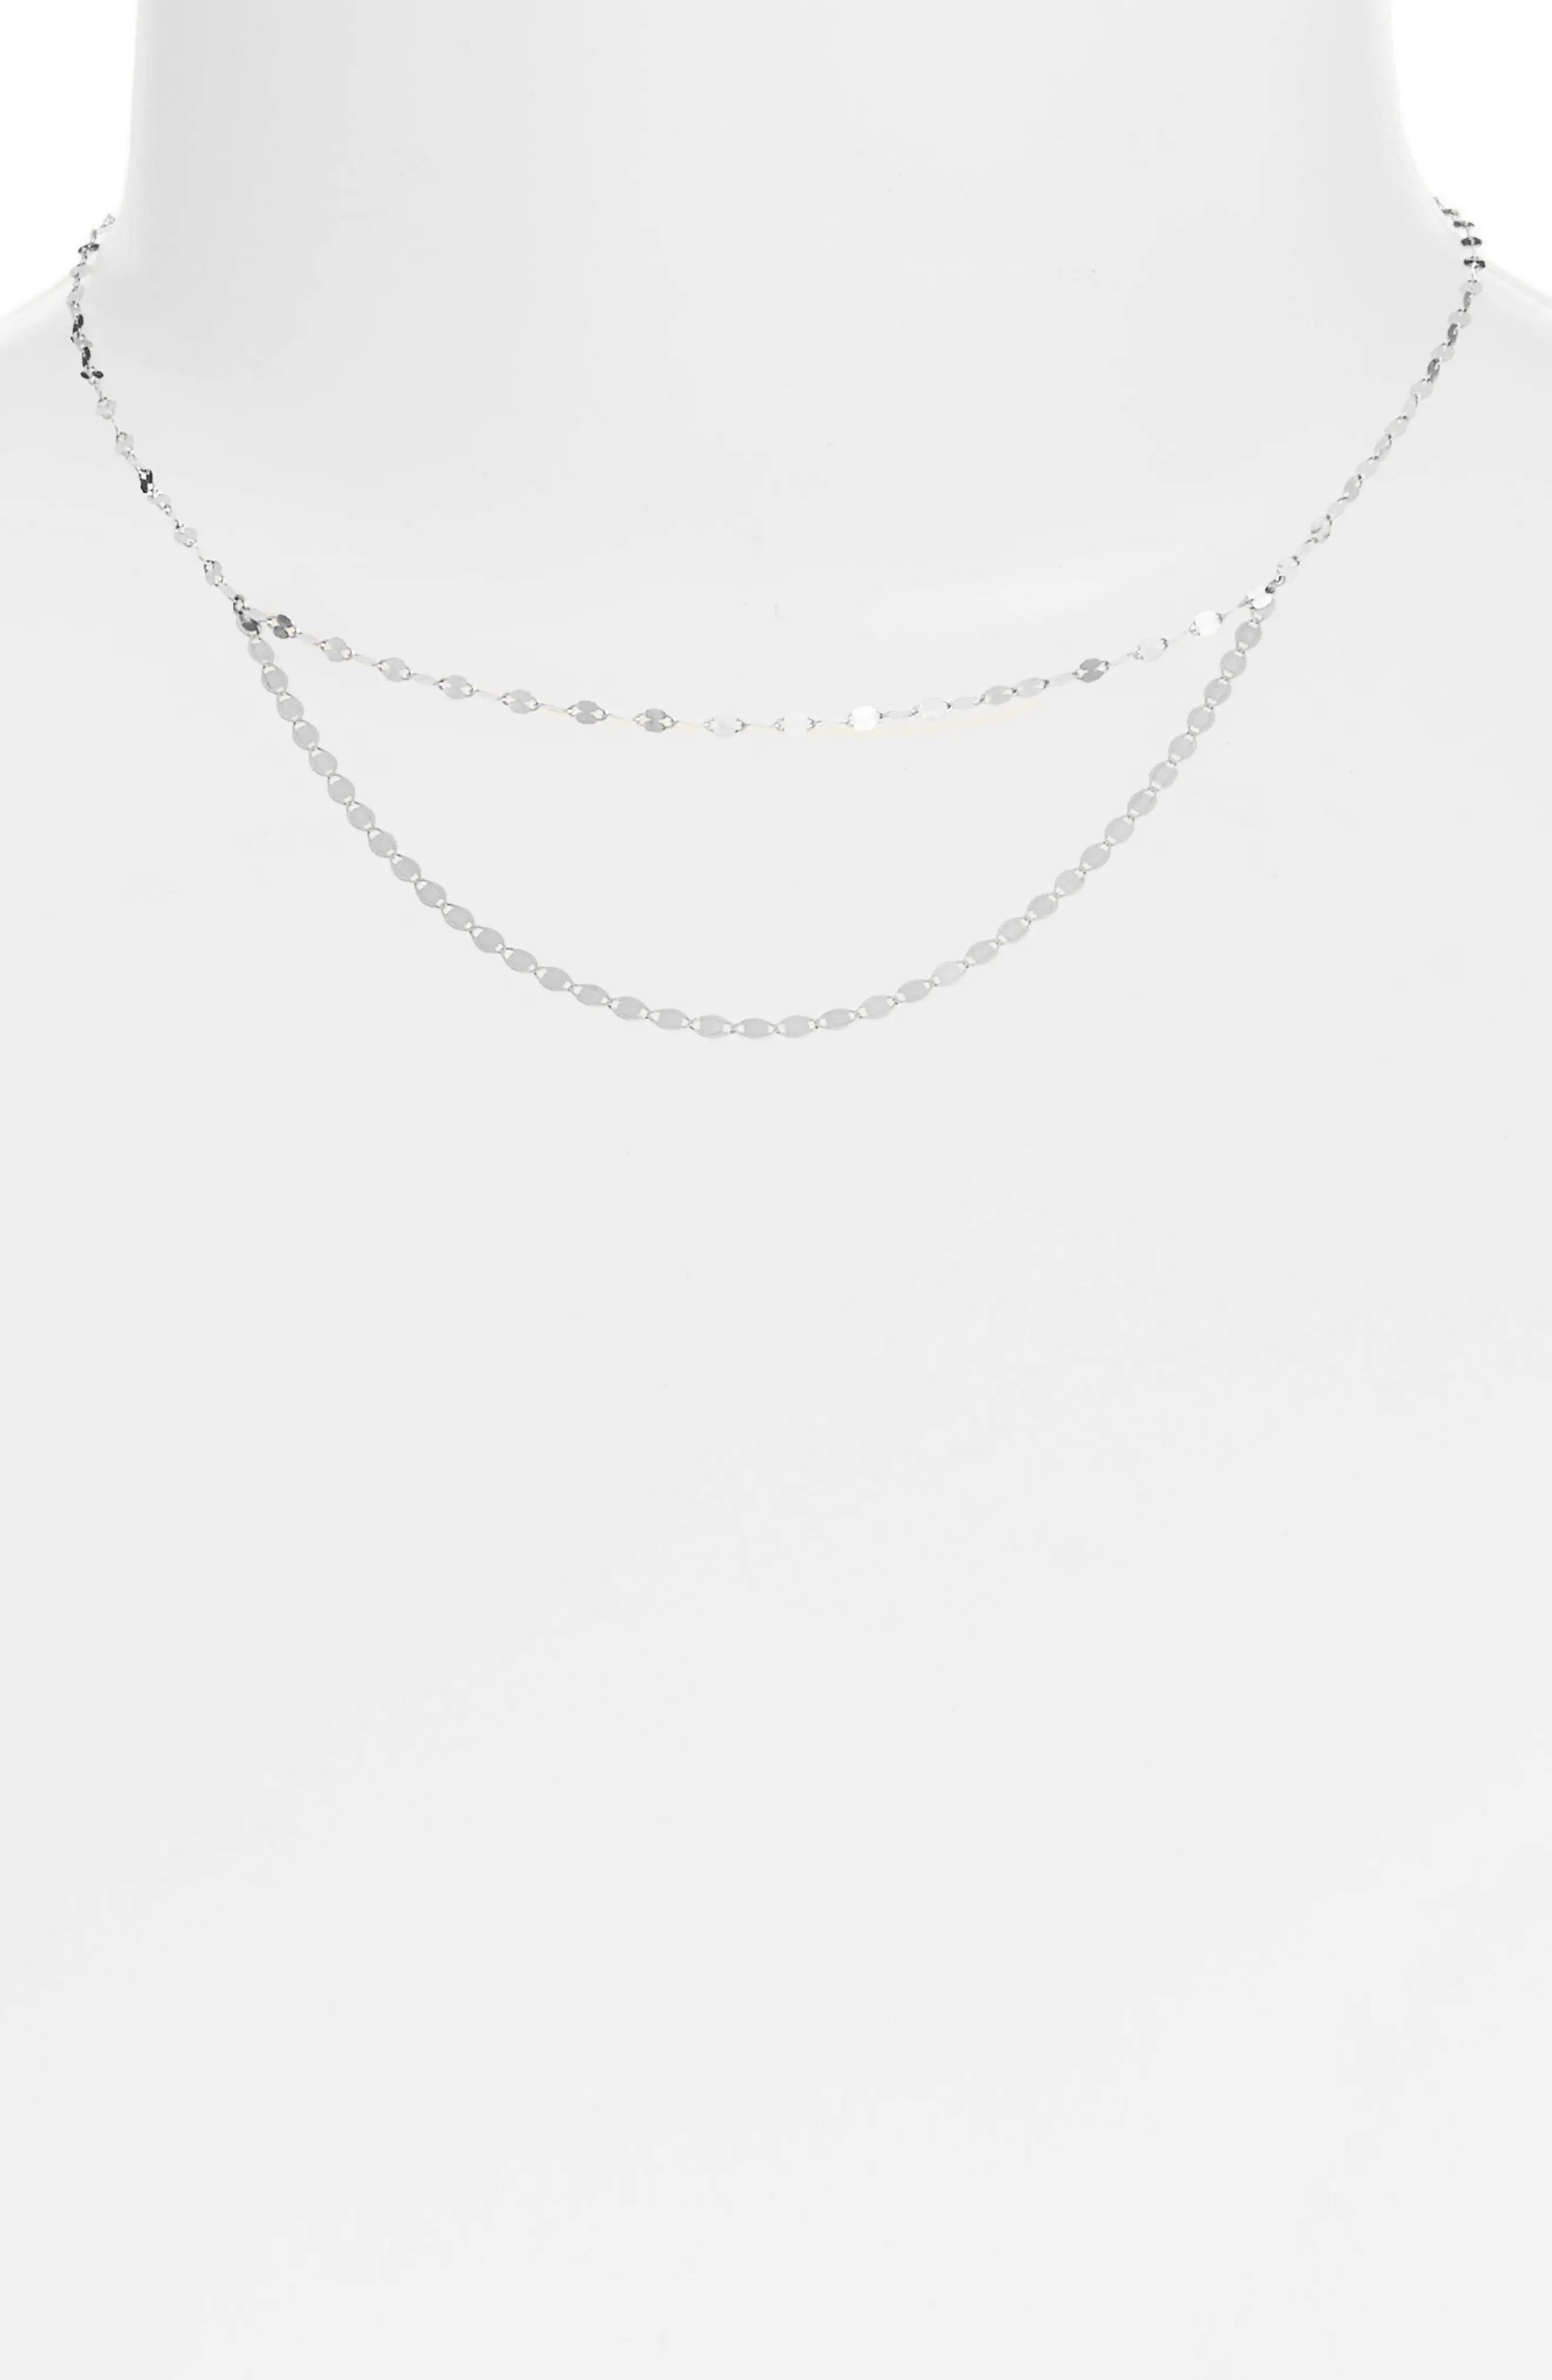 Lana Jewelry Blake Nude Duo Necklace | Nordstrom